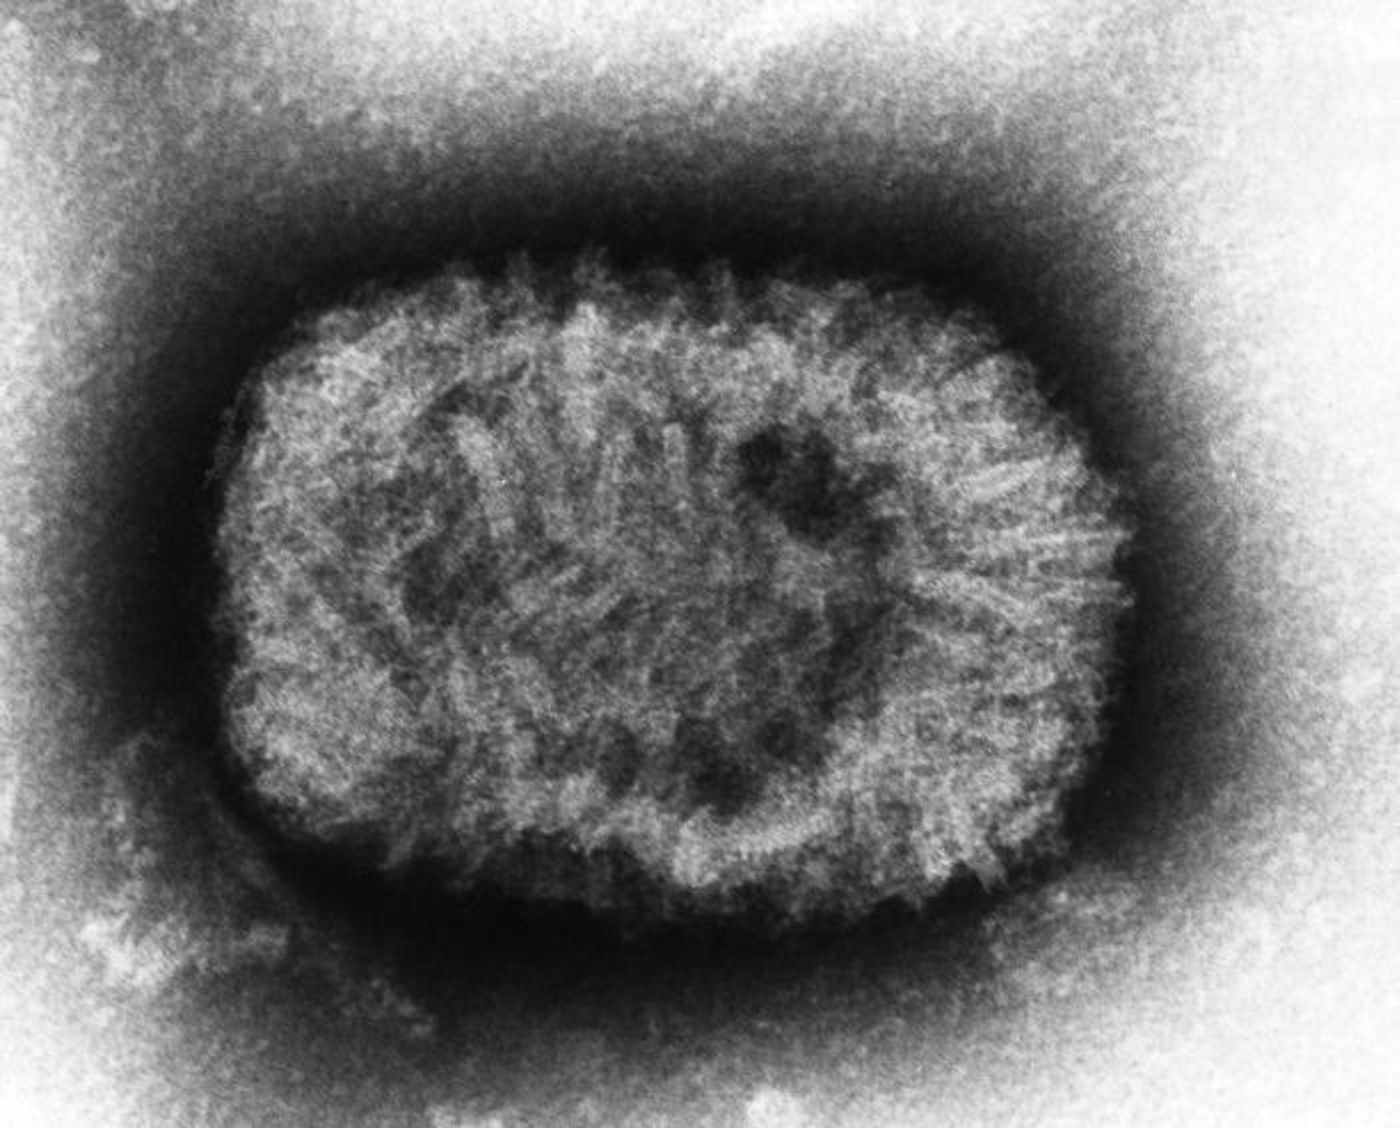 Highly magnified at 310,000X, this negative-stained transmission electron microscopic (TEM) image depicted a smallpox (variola) virus particle, or a single virion. / Credit: CDC / James Nakano